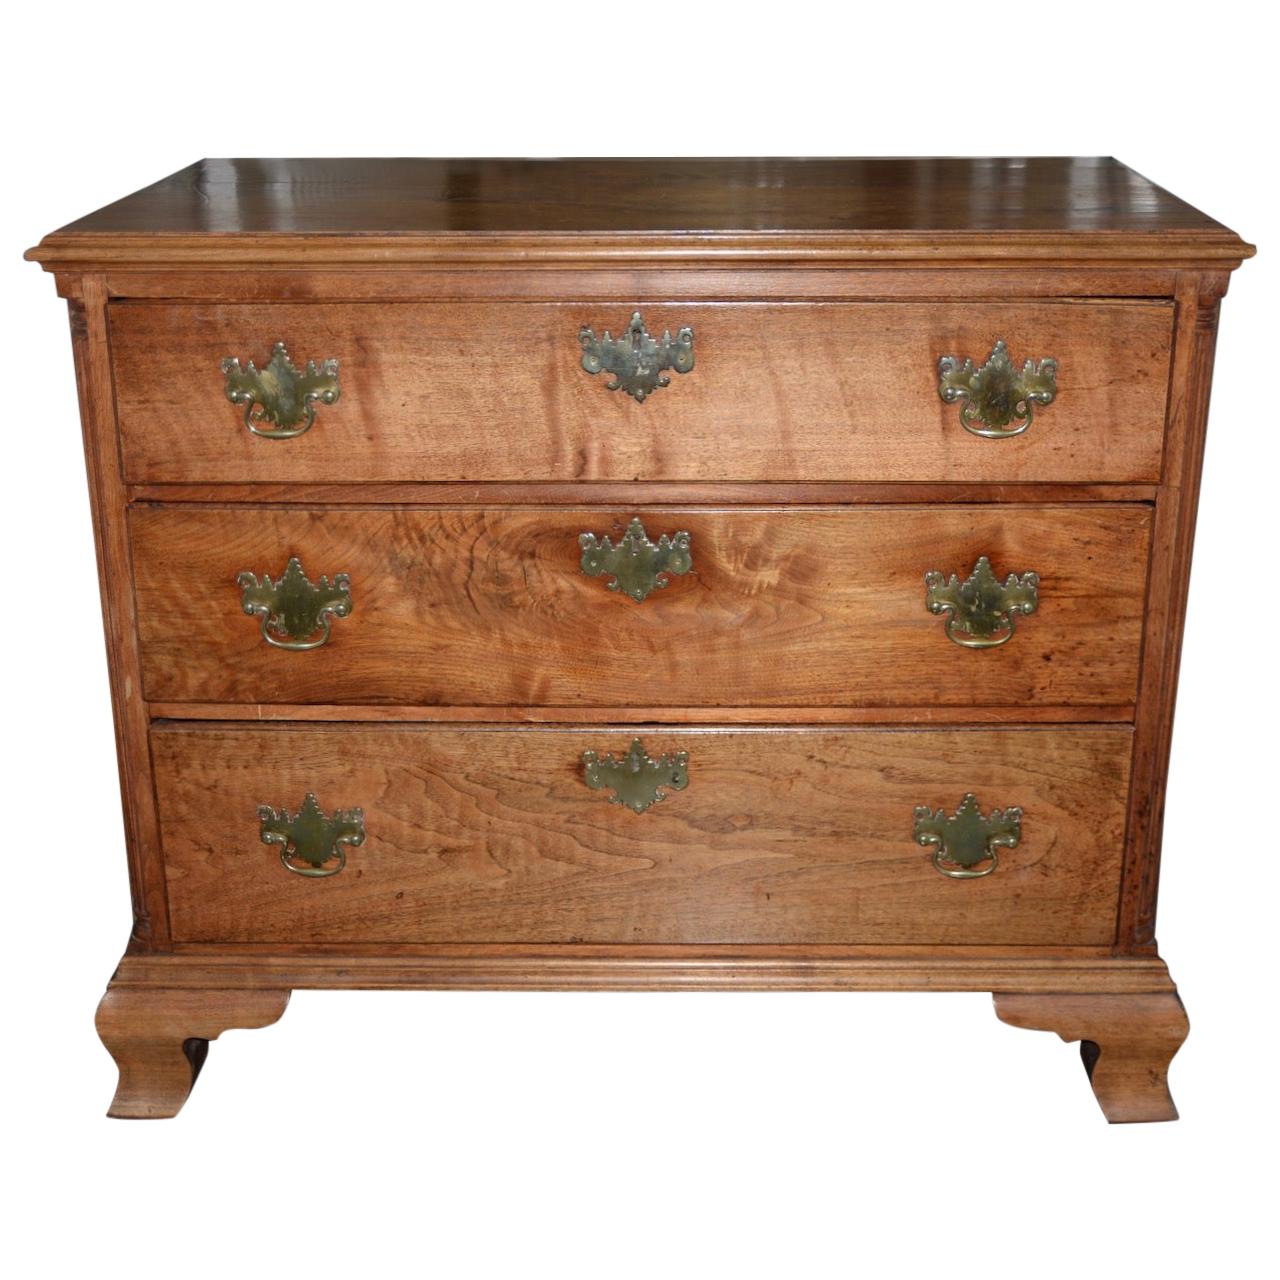 Early American Chippendale Period Maple Chest of Drawers For Sale